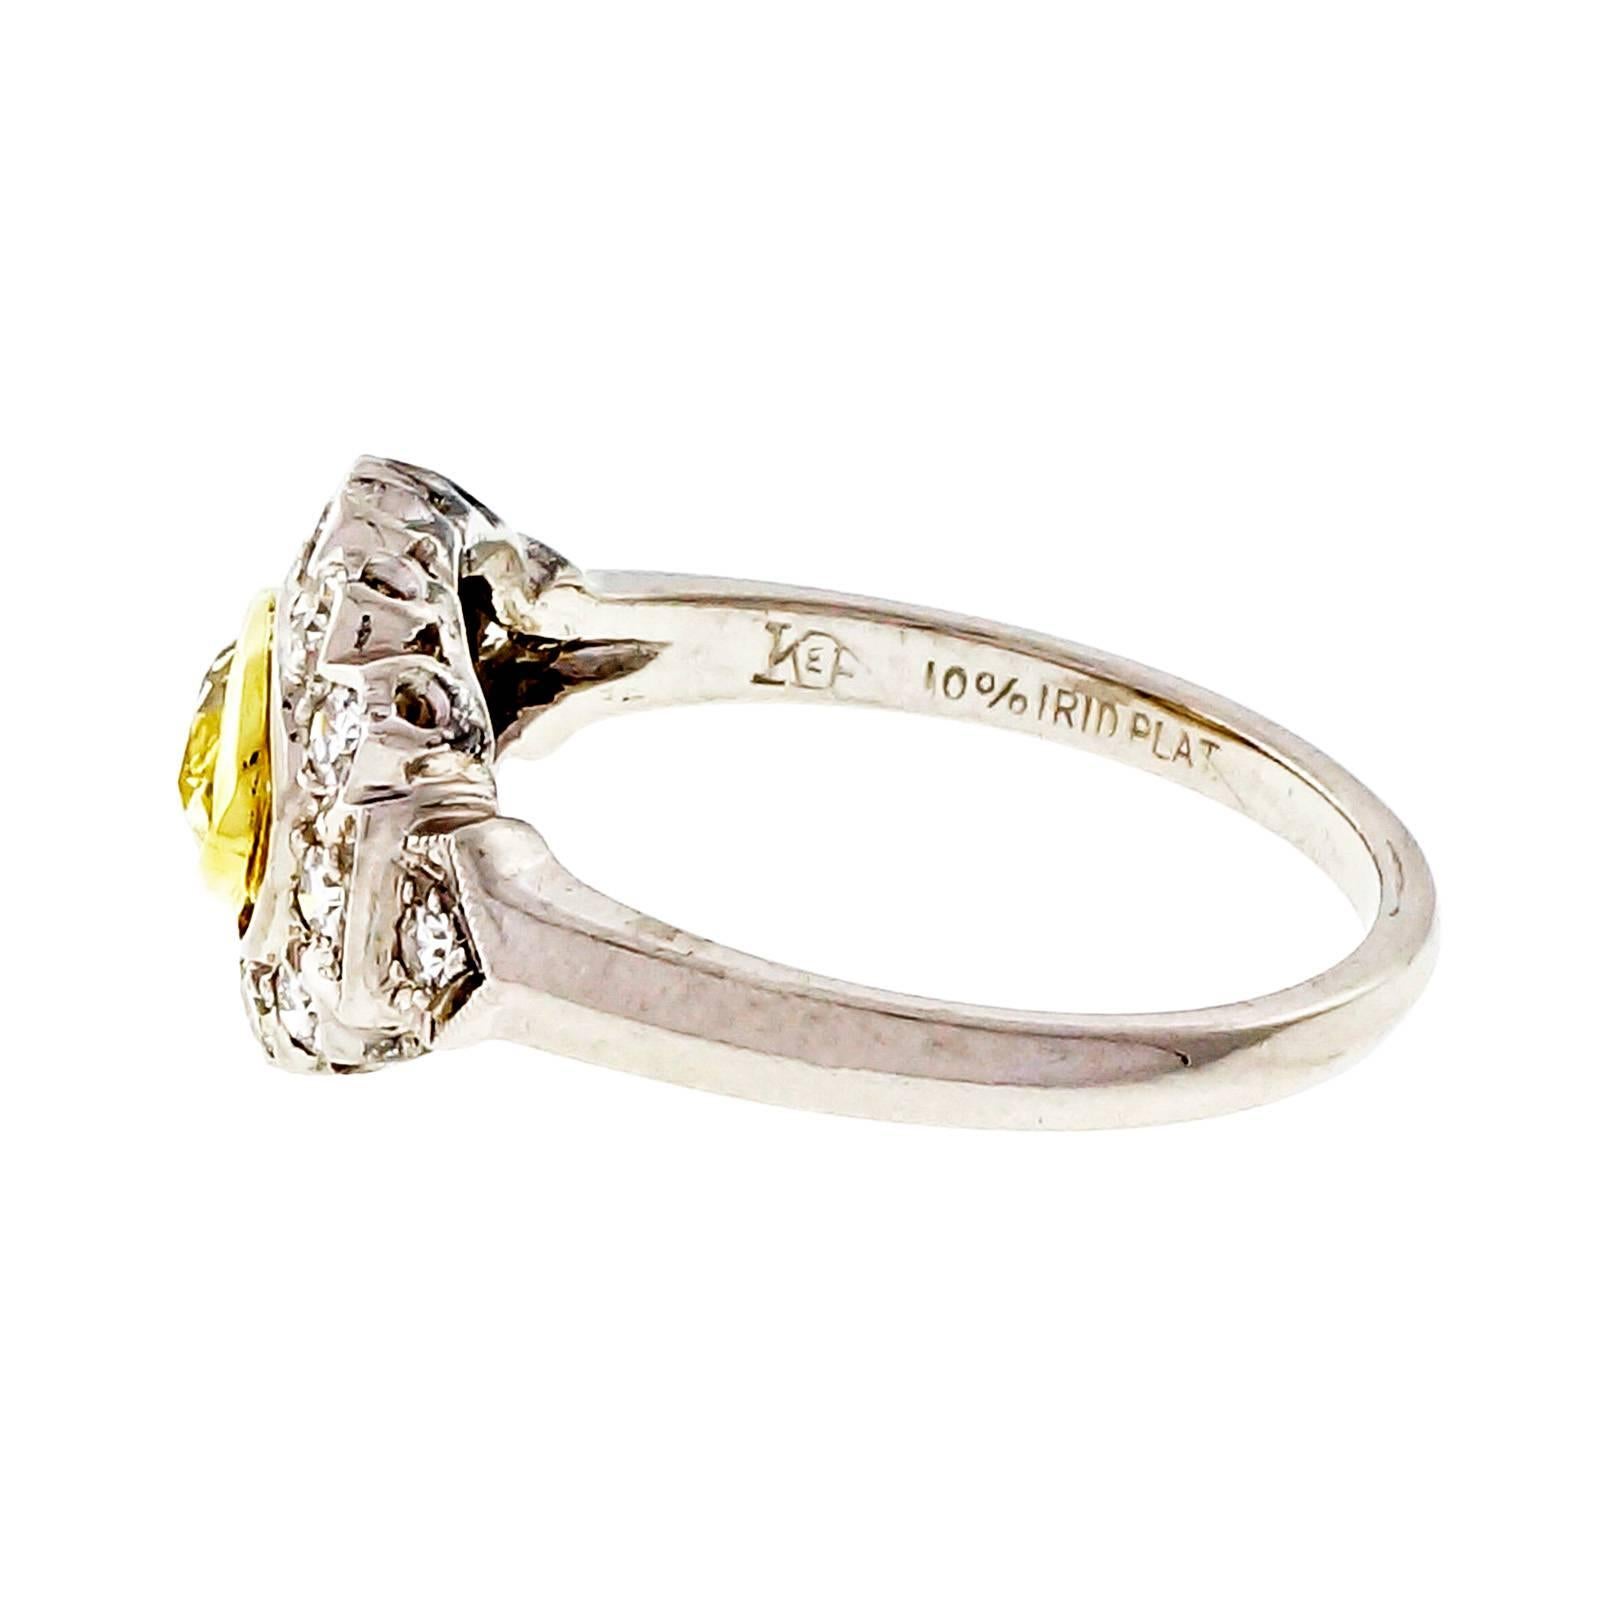 Fancy intense natural yellow GIA certificate diamond Marquise shape in its all original Platinum 1940’s engagement ring. Sits across the finger. Bezel set low. Surrounded by white diamonds.

1 Marquise fancy intense yellow diamond, approx. total